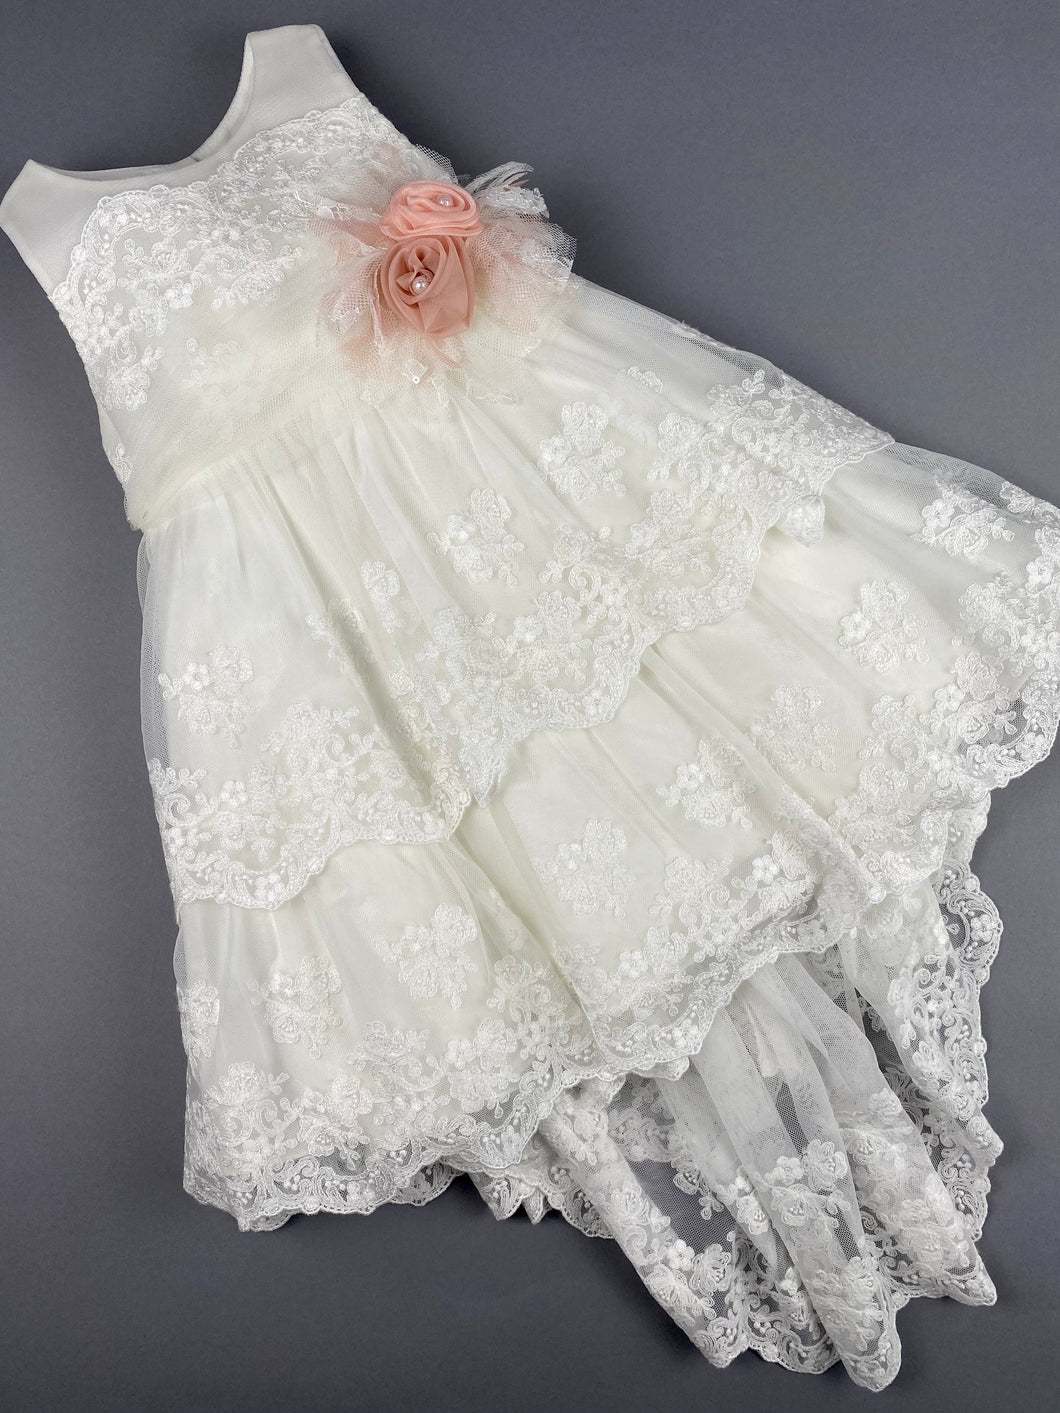 Dress 26 Girls Baptismal Christening Sleeveless  3pc French Lace Layered  Dress with long French Lace trail, matching Bolero and Hat. Made in Greece exclusively for Rosies Collections.